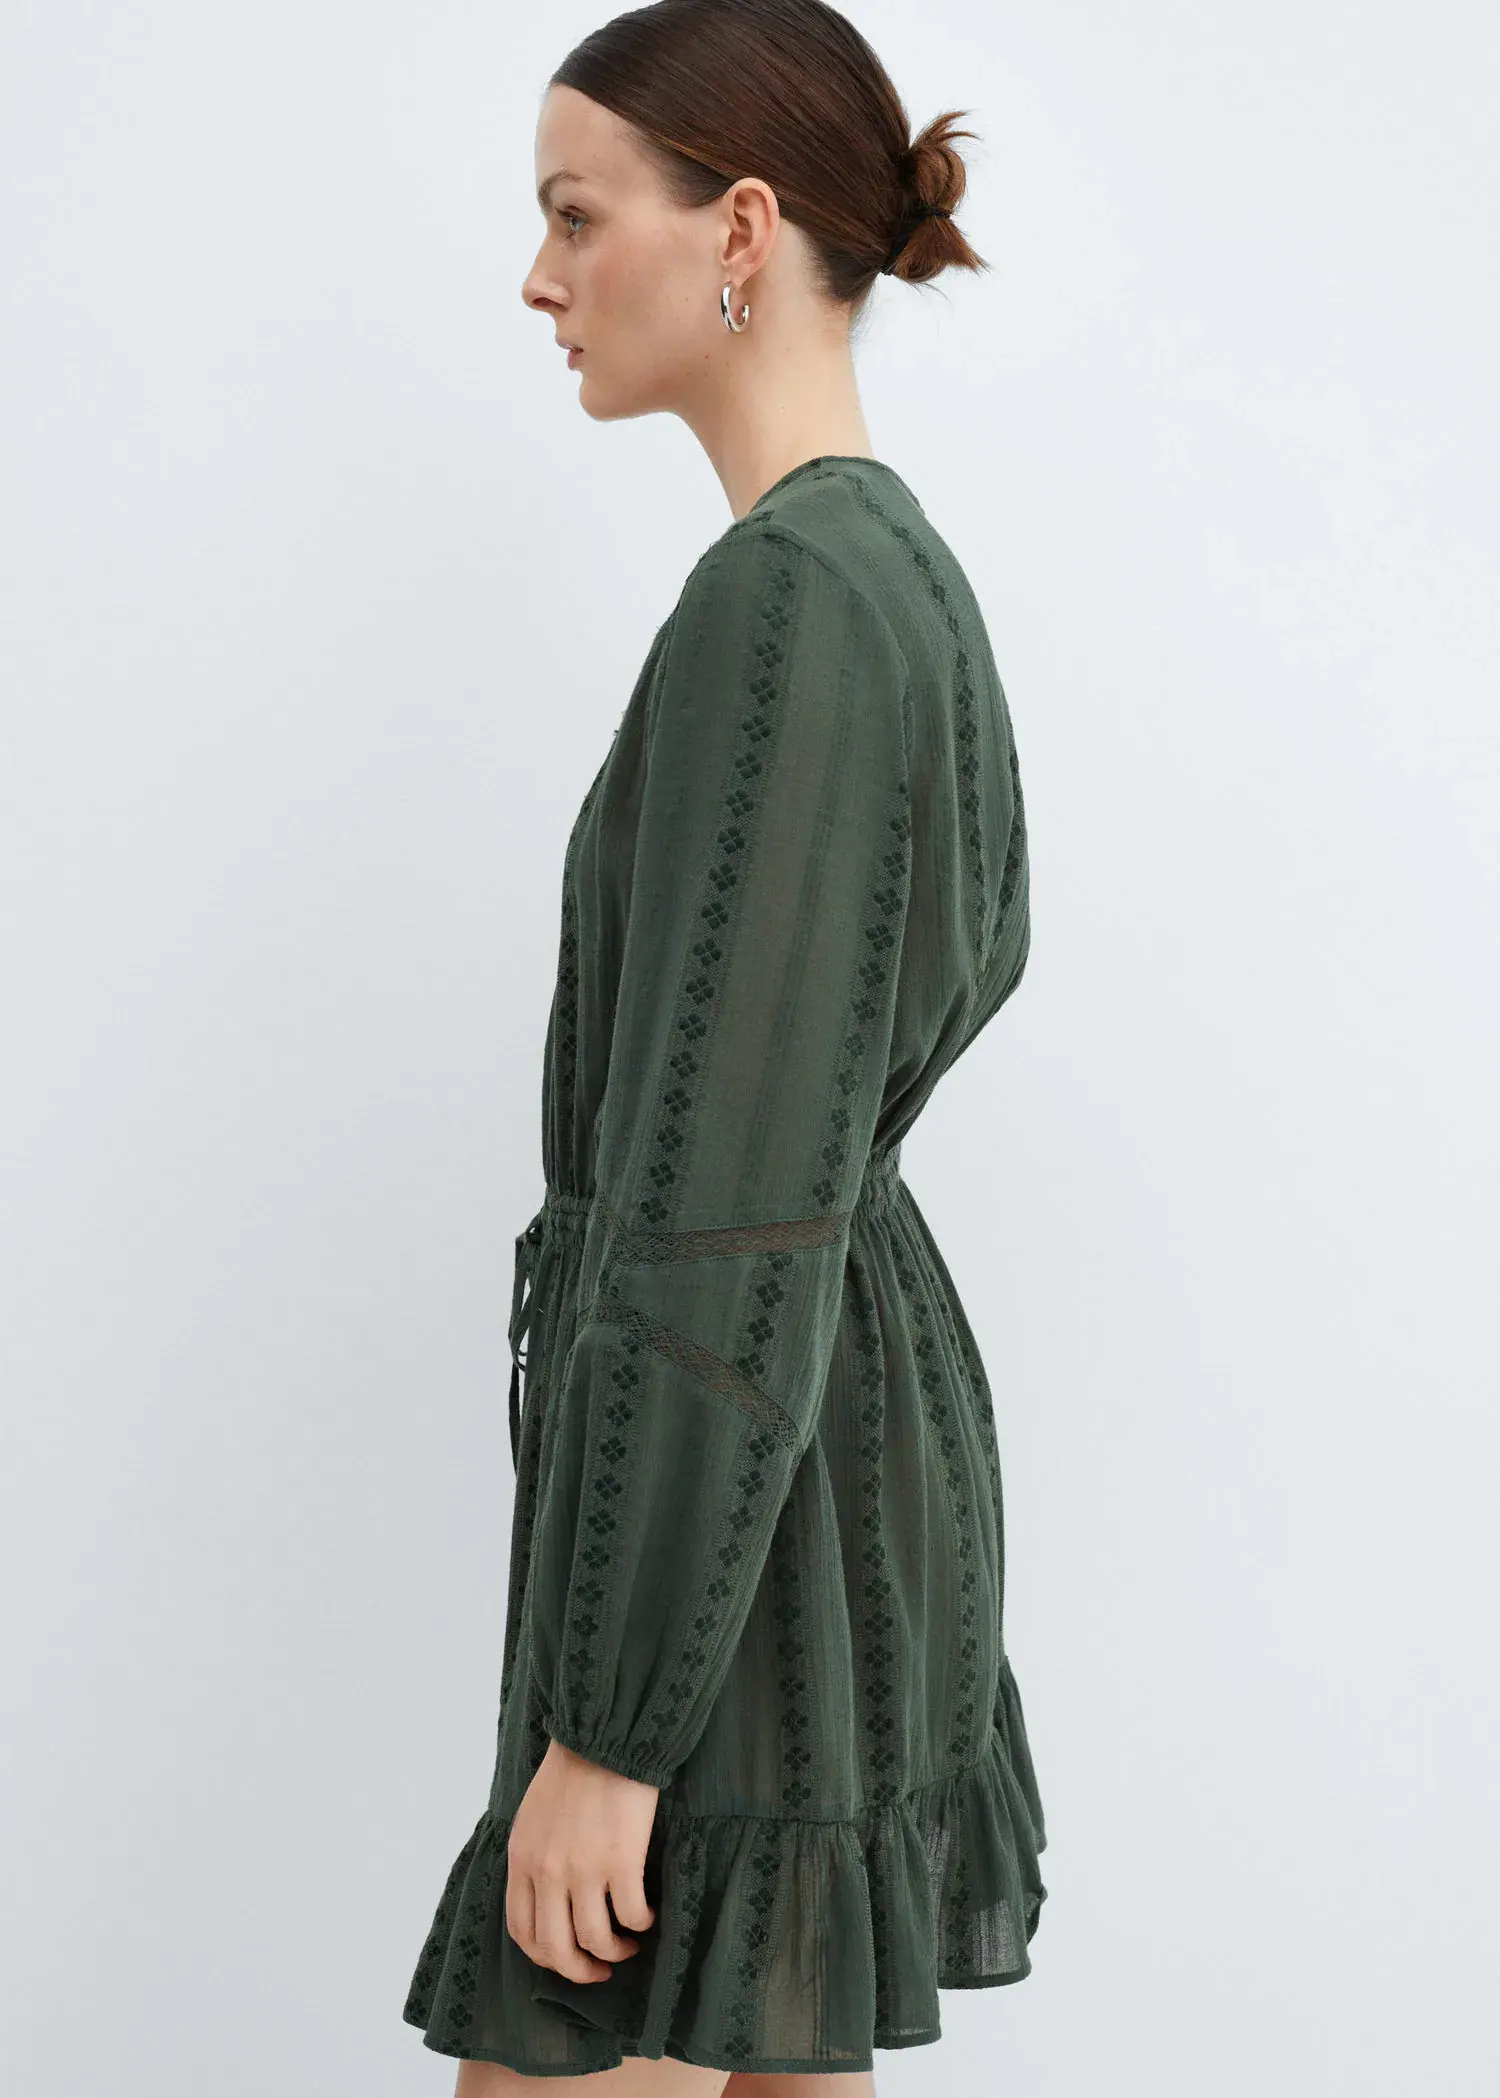 Mango Puff-sleeved embroidered dress. 2